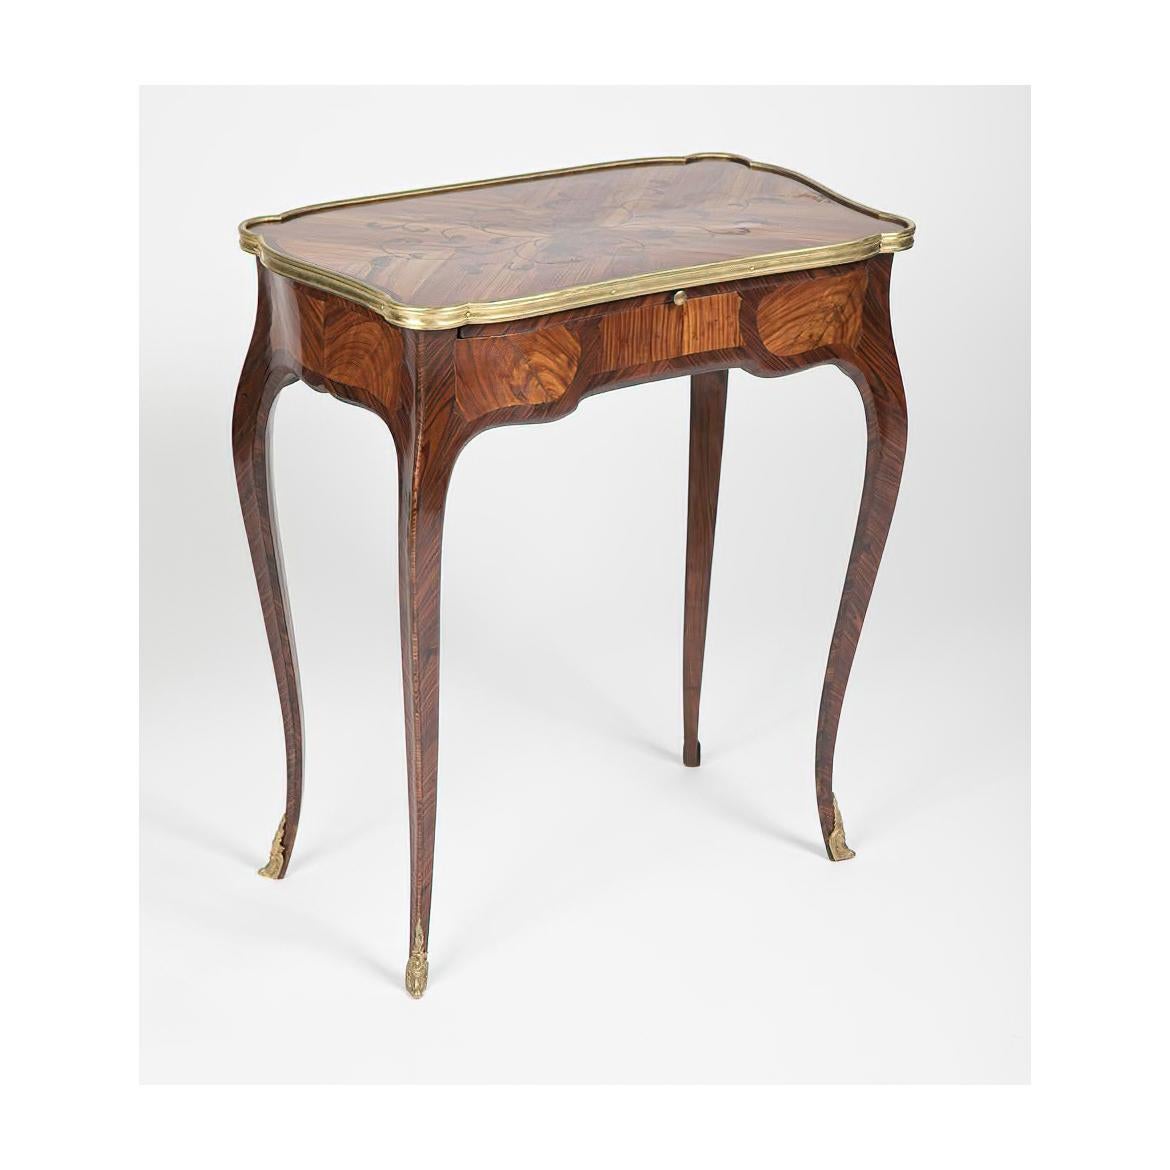 A French Louis XV marquetry inlaid side table with bronze mounts, a leather-lined slide-out writing surface and drawers on cabriole legs with bronze ormolu sabots.